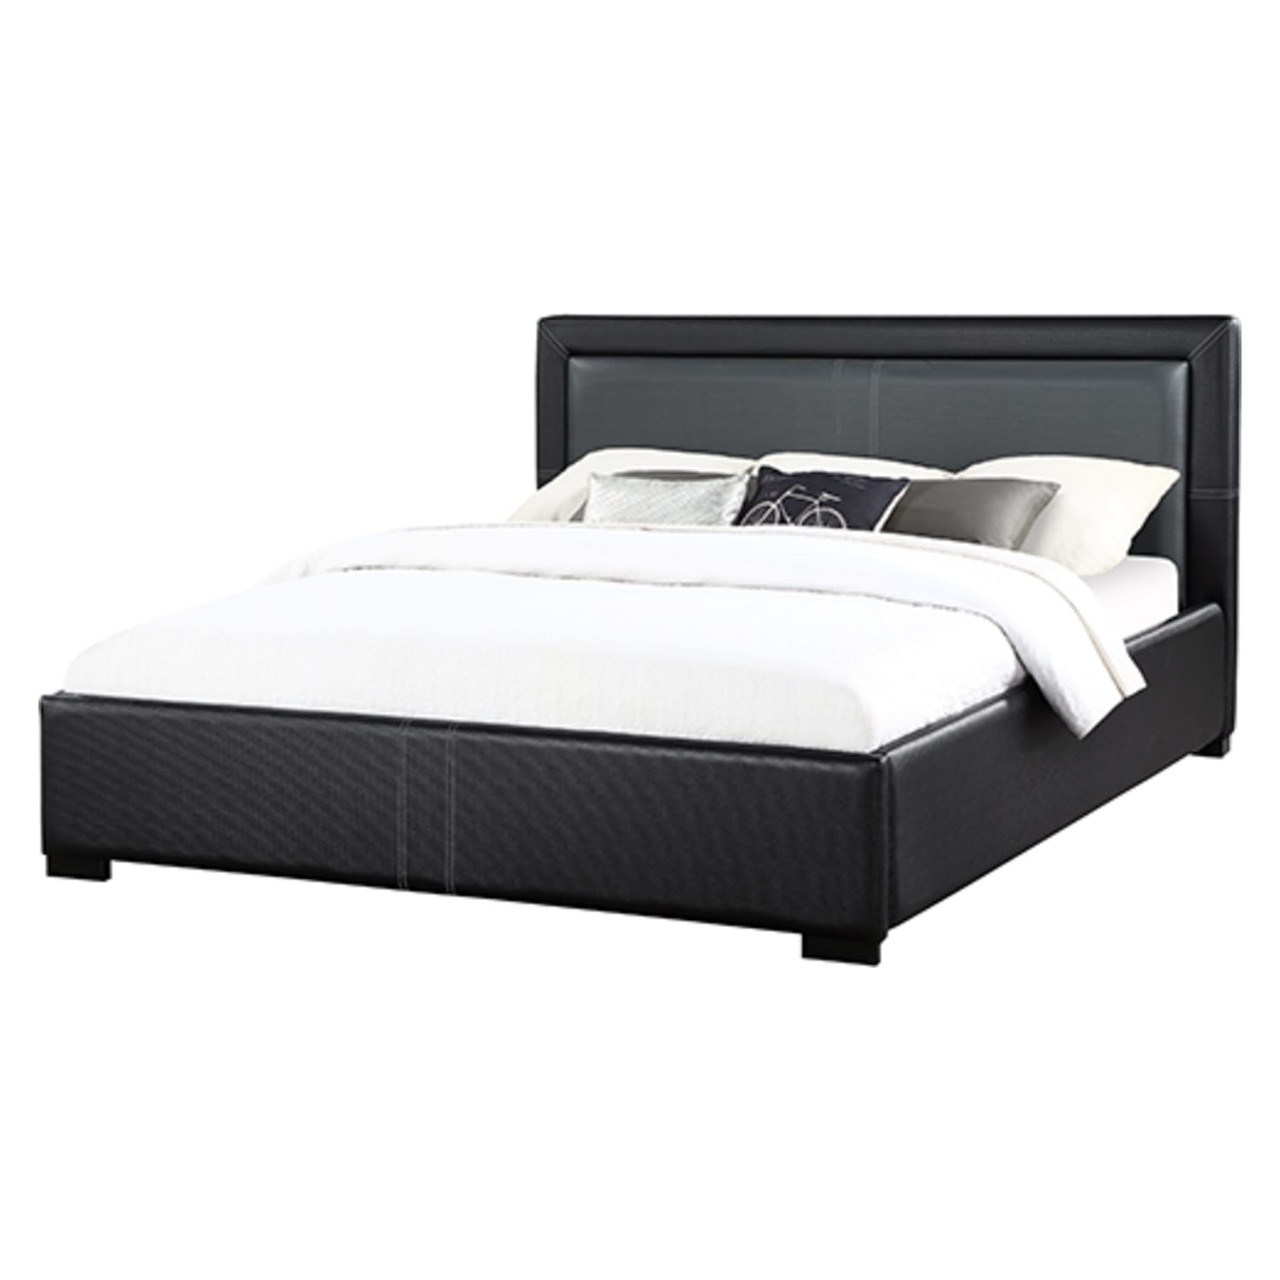 Times Square Bed - King